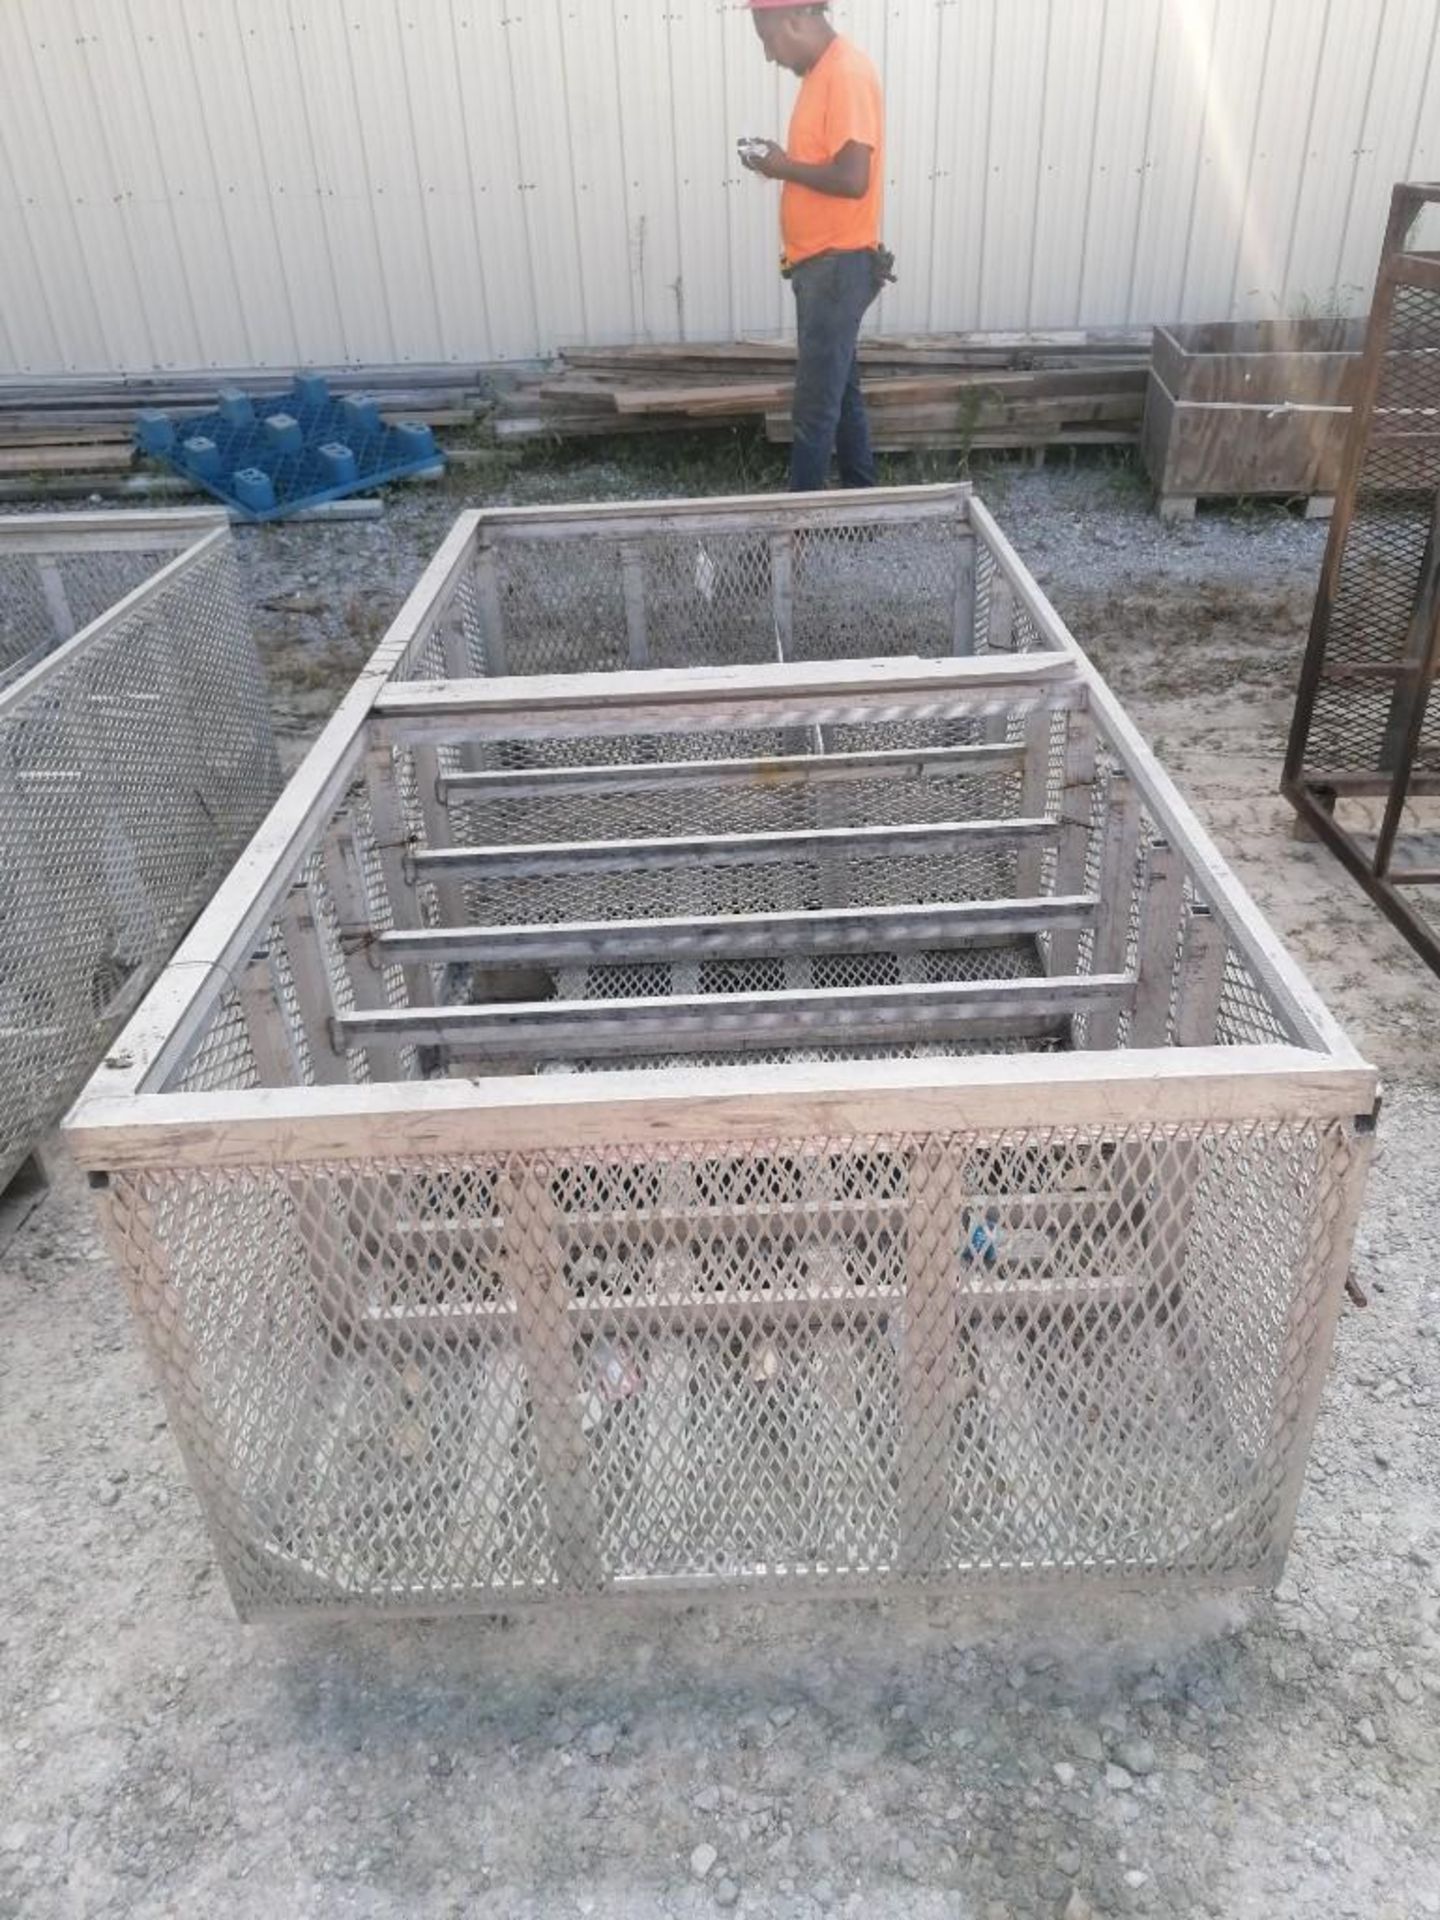 2' & 4' Fillers Basket. Located at 301 E Henry Street, Mt. Pleasant, IA 52641. - Image 2 of 2